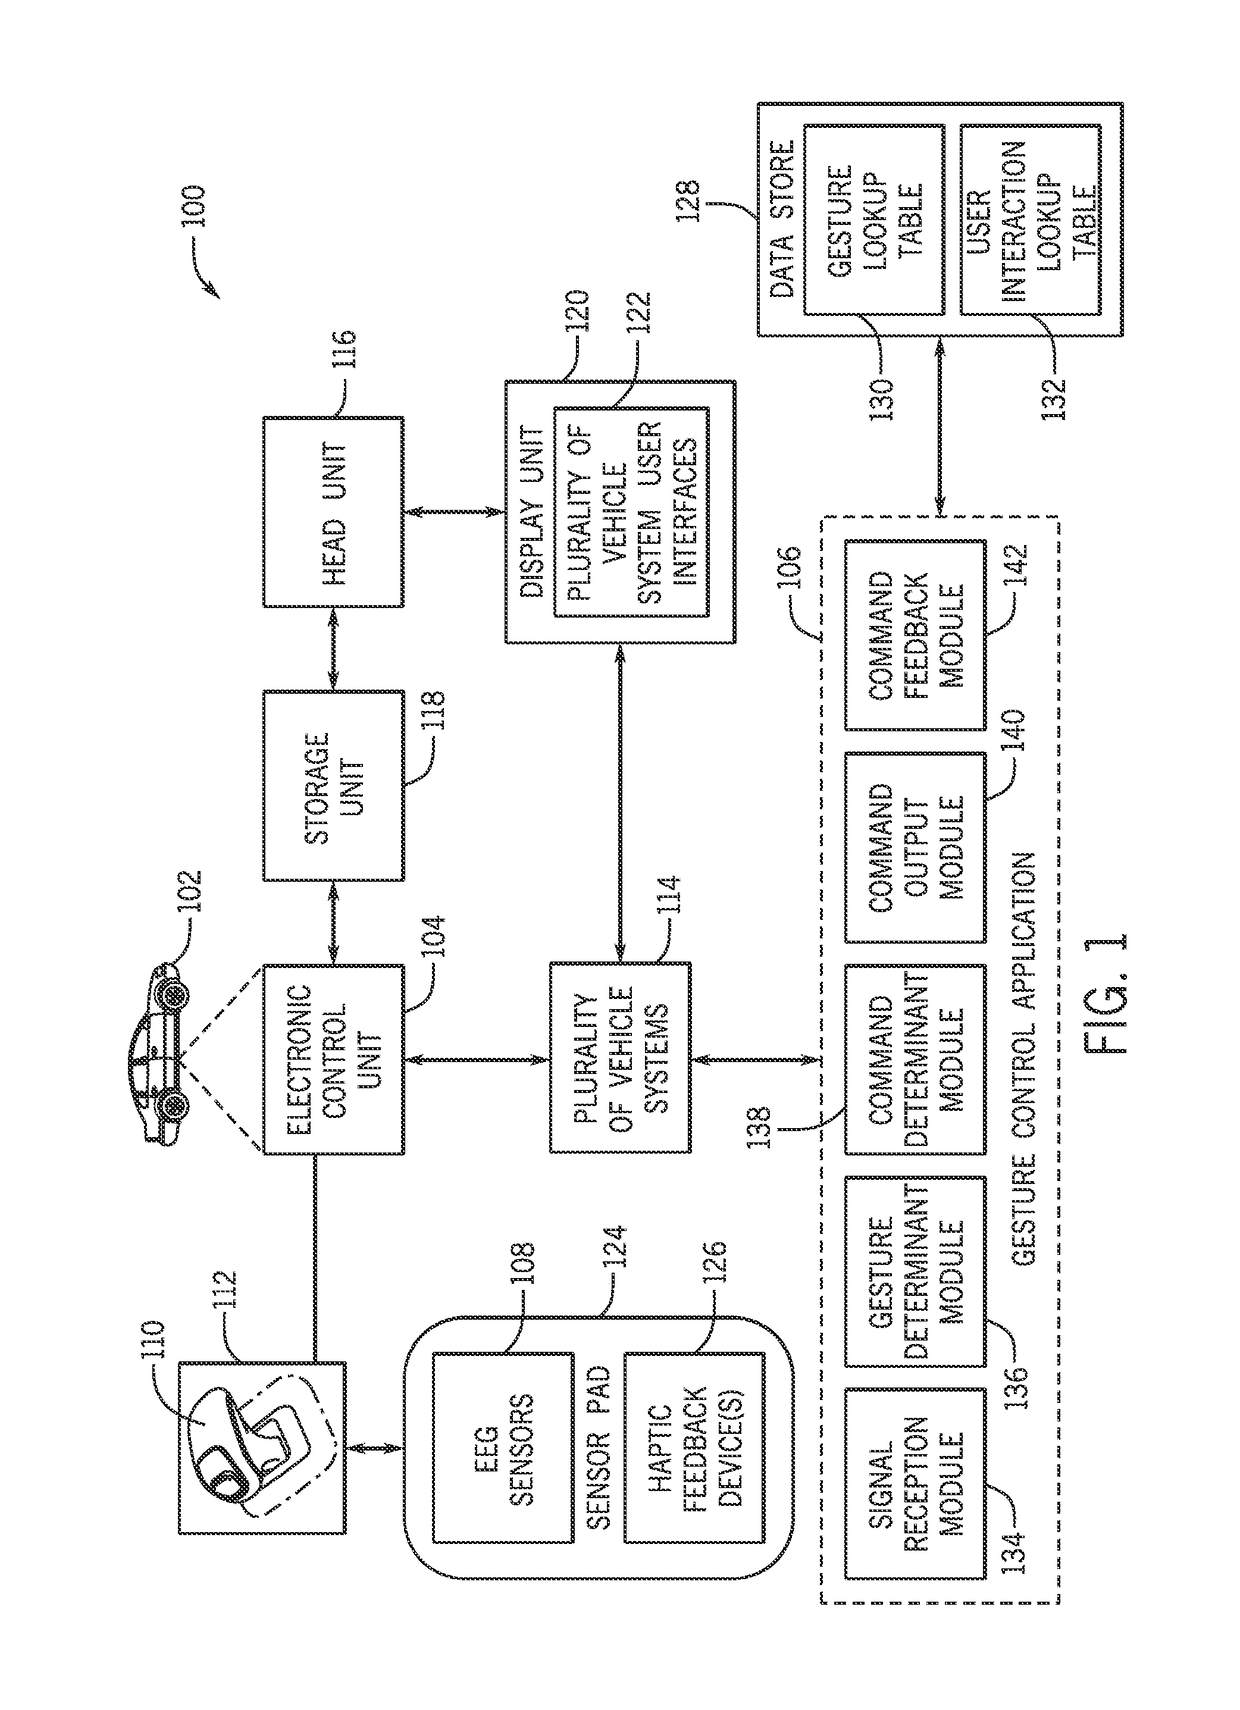 System and method for executing gesture based control of a vehicle system